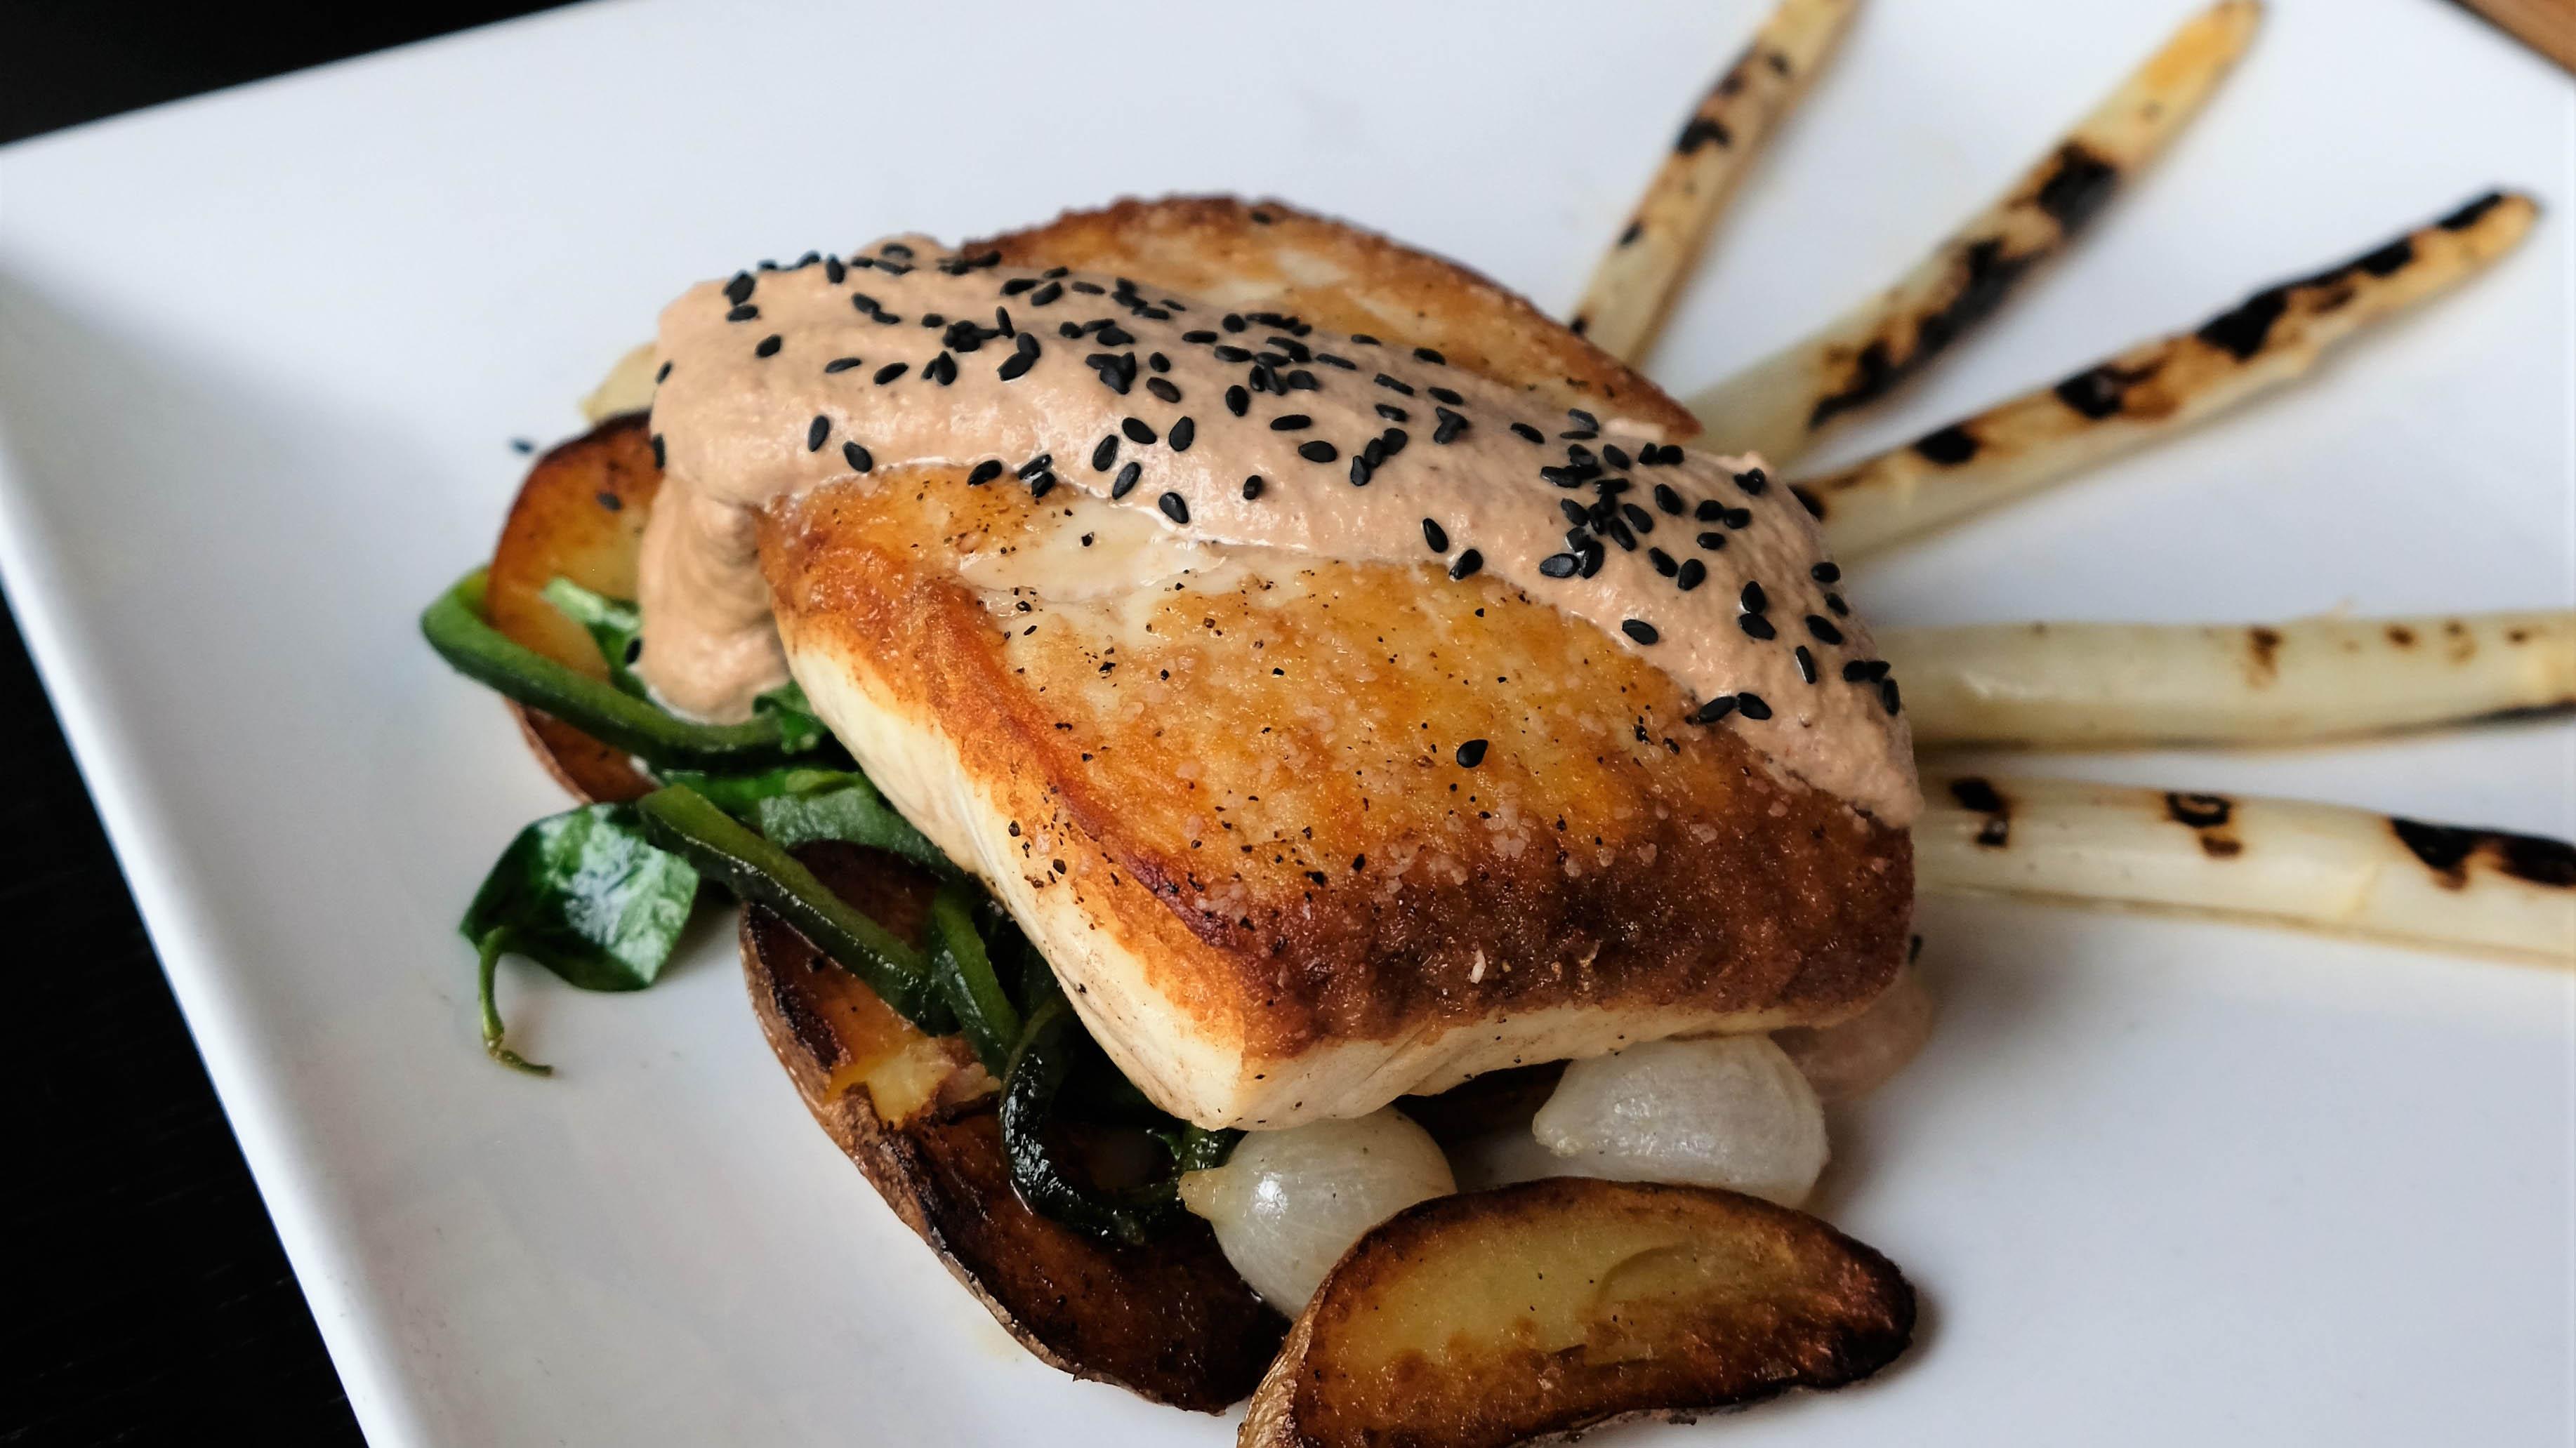 El Palomo by Café Con Leche features pan seared white fish, roasted fingerling potatoes, poblano peppers, spinach, white onion pearls and white mole sauce. (Courtesy of Café Con Leche)